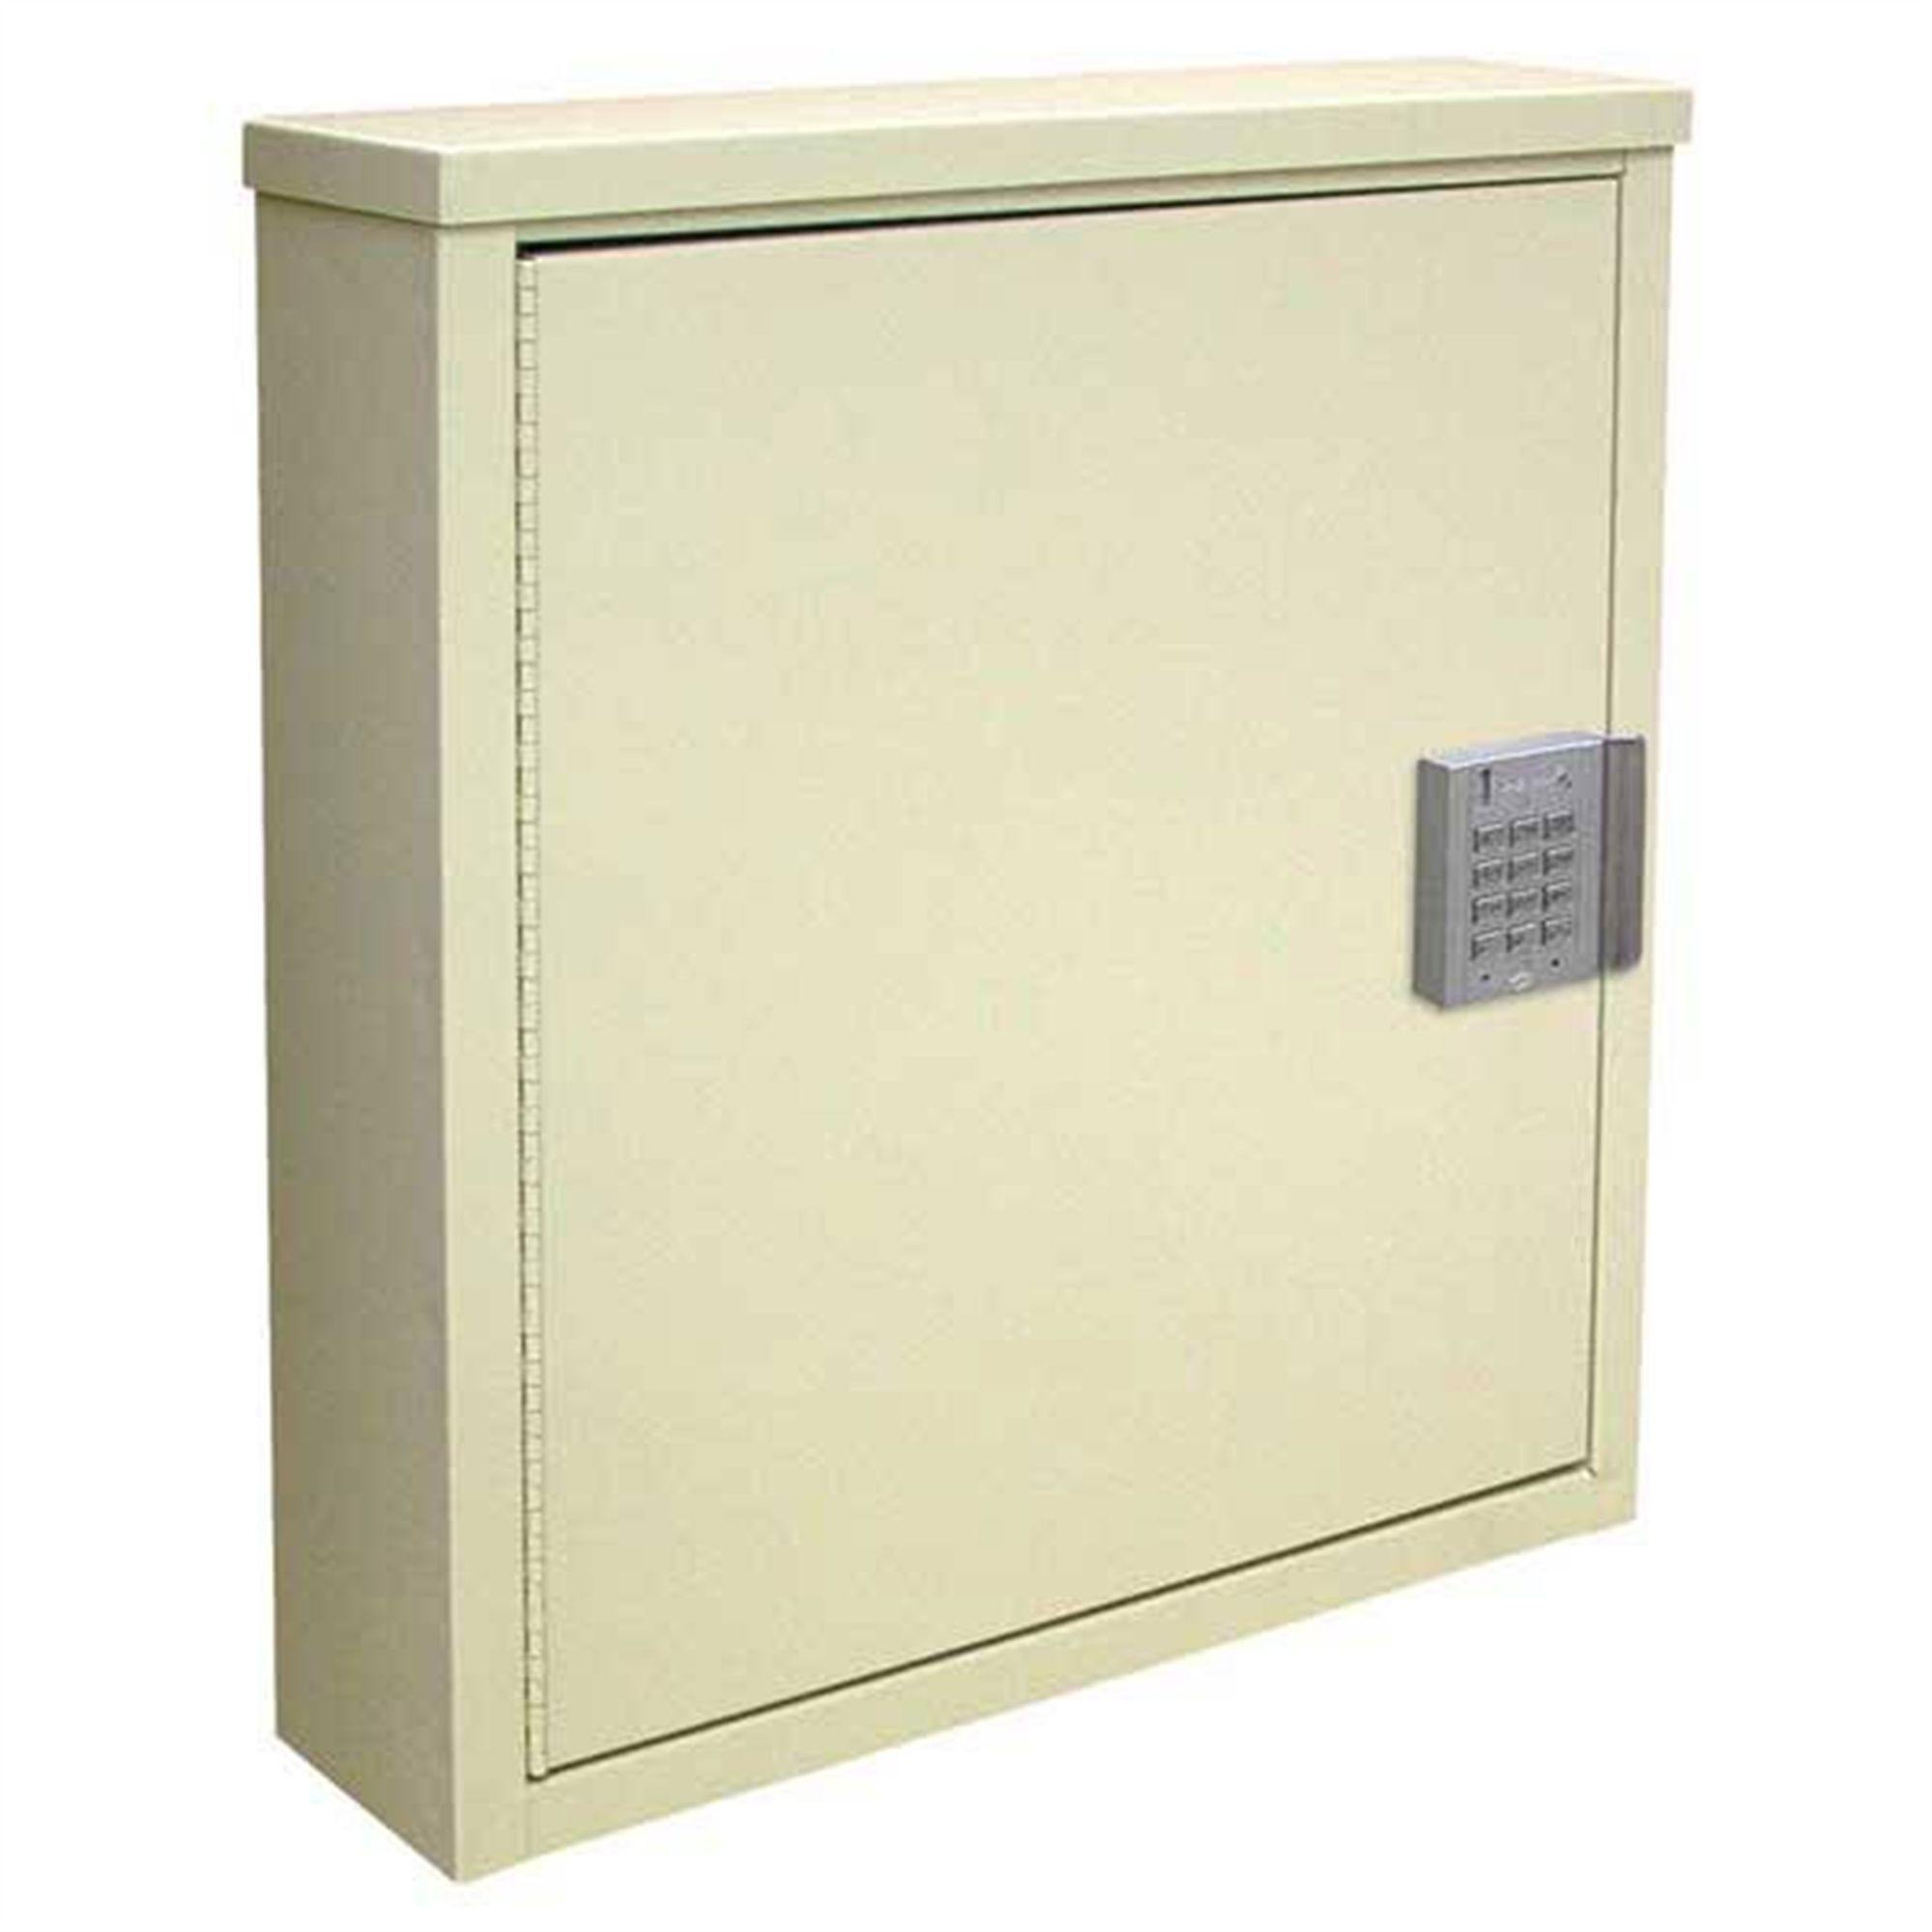 Single Door Narcotics Cabinet with E-Lock Bypass/Manager Key for ML4445-4446 ,1 Each - Axiom Medical Supplies